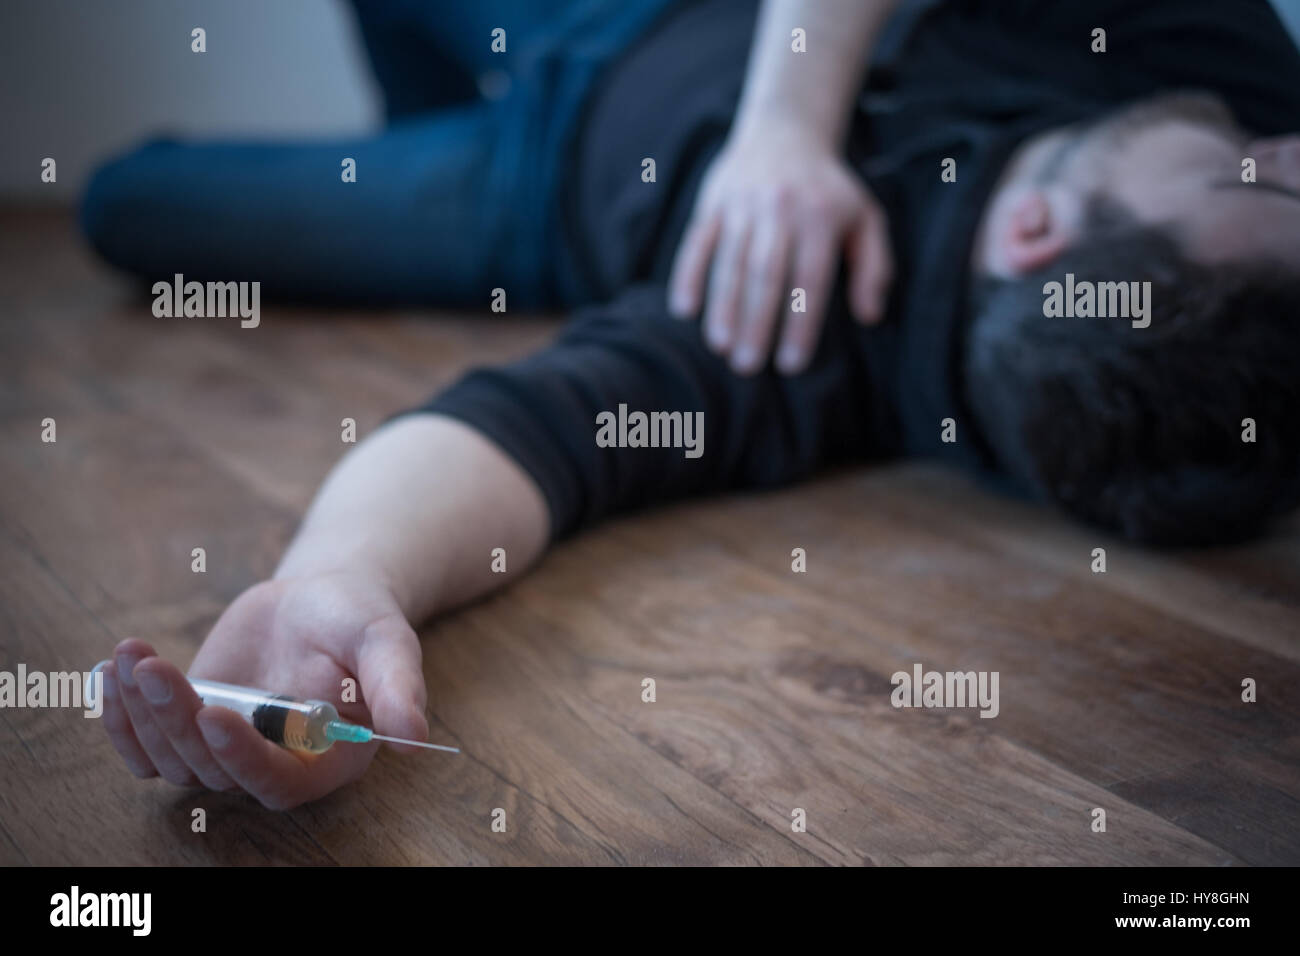 Man lying down on the floor after a drug overdose Stock Photo